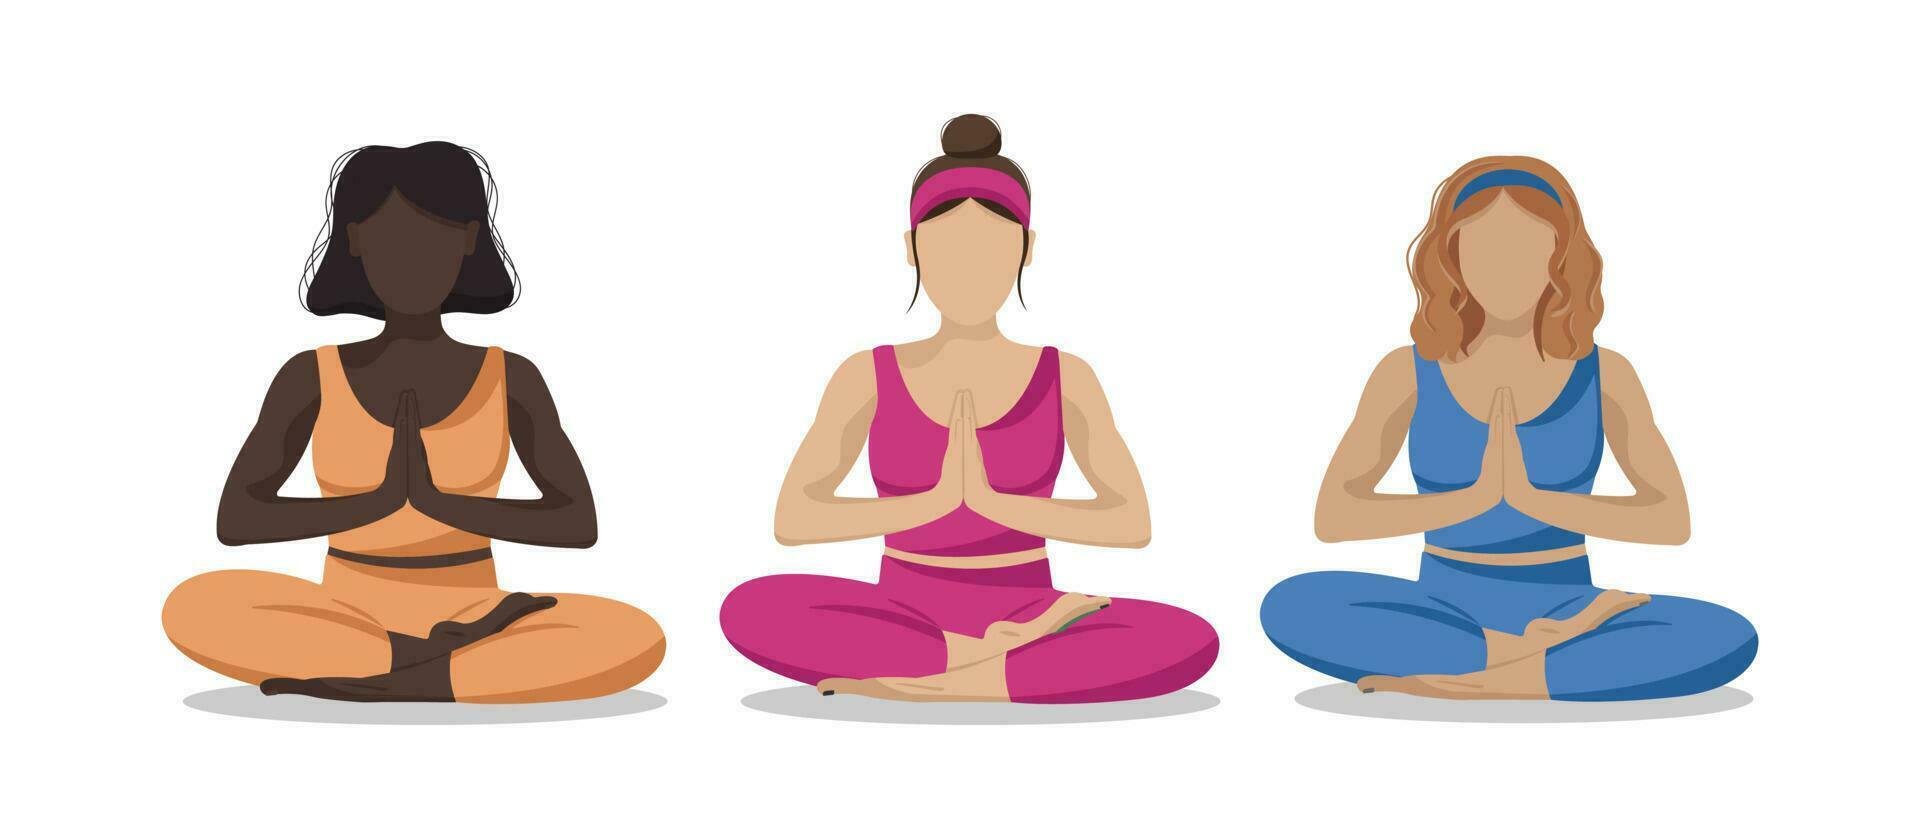 Sport team of faceless women sitting in lotus yoga asana pose. Mental health, emotions control and personal harmony concept. Time for yourself. Vector flat illustration in cartoon style.